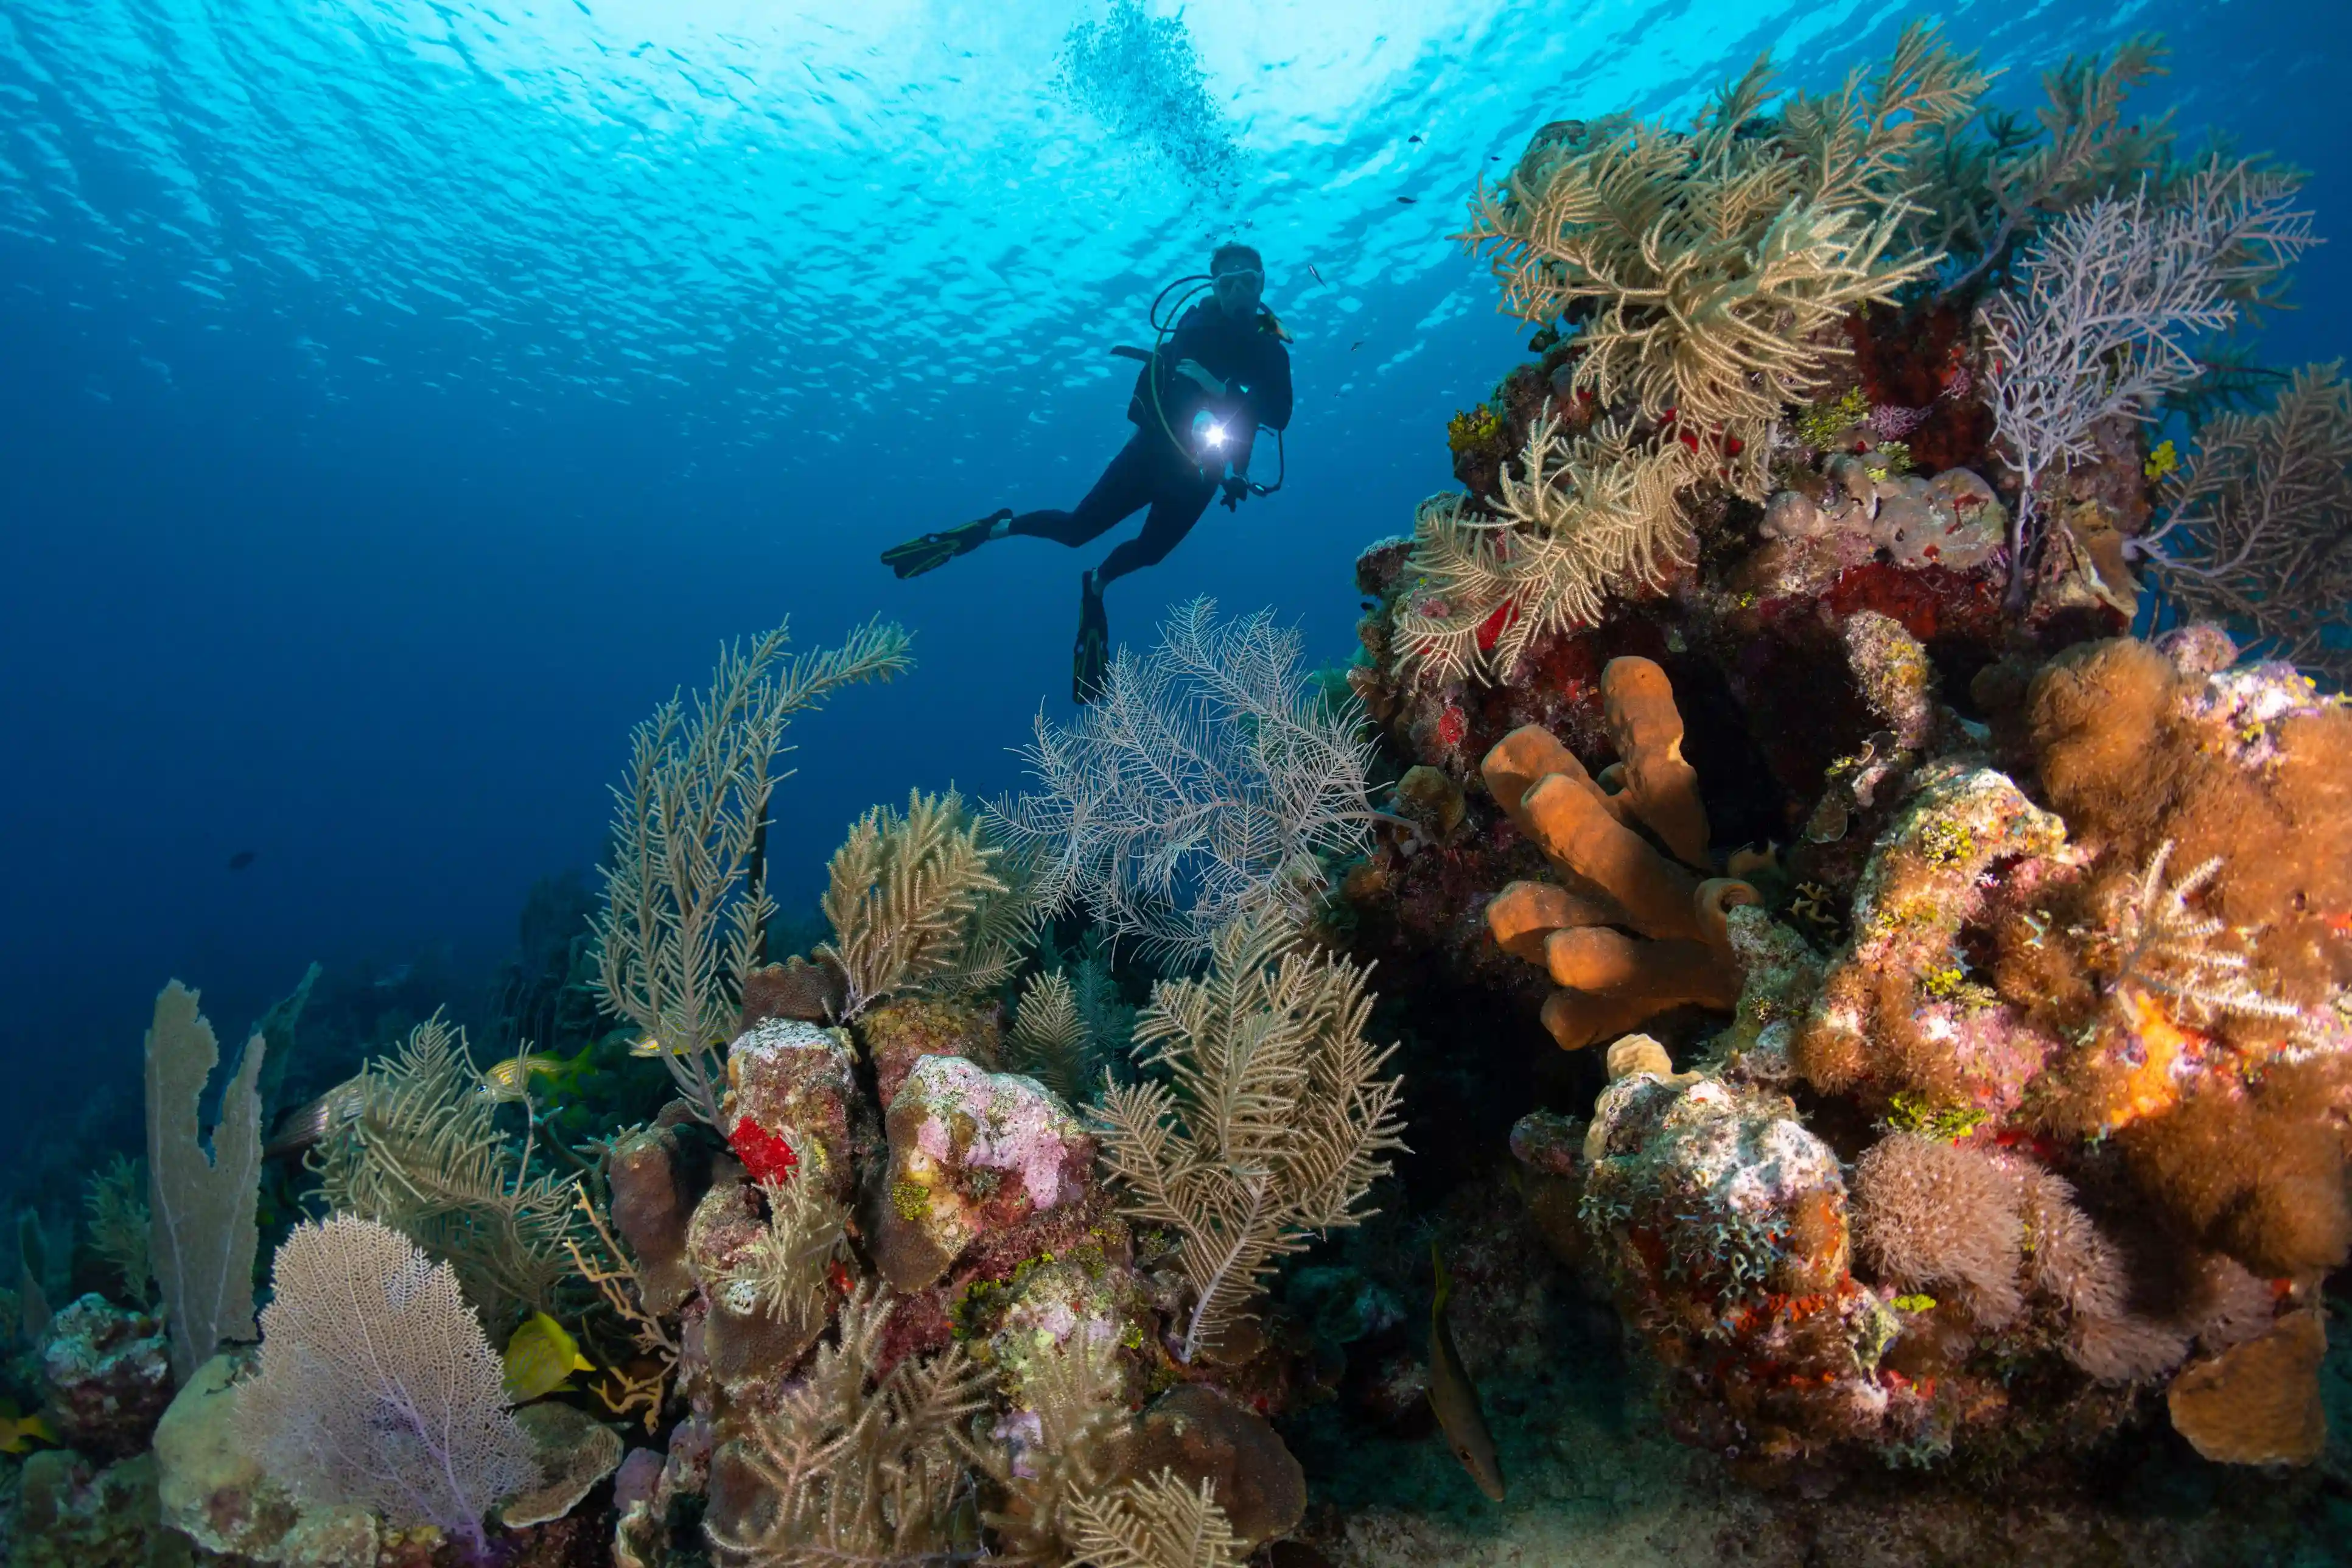 Diving and Snorkeling the many Reefs in Grand Cayman